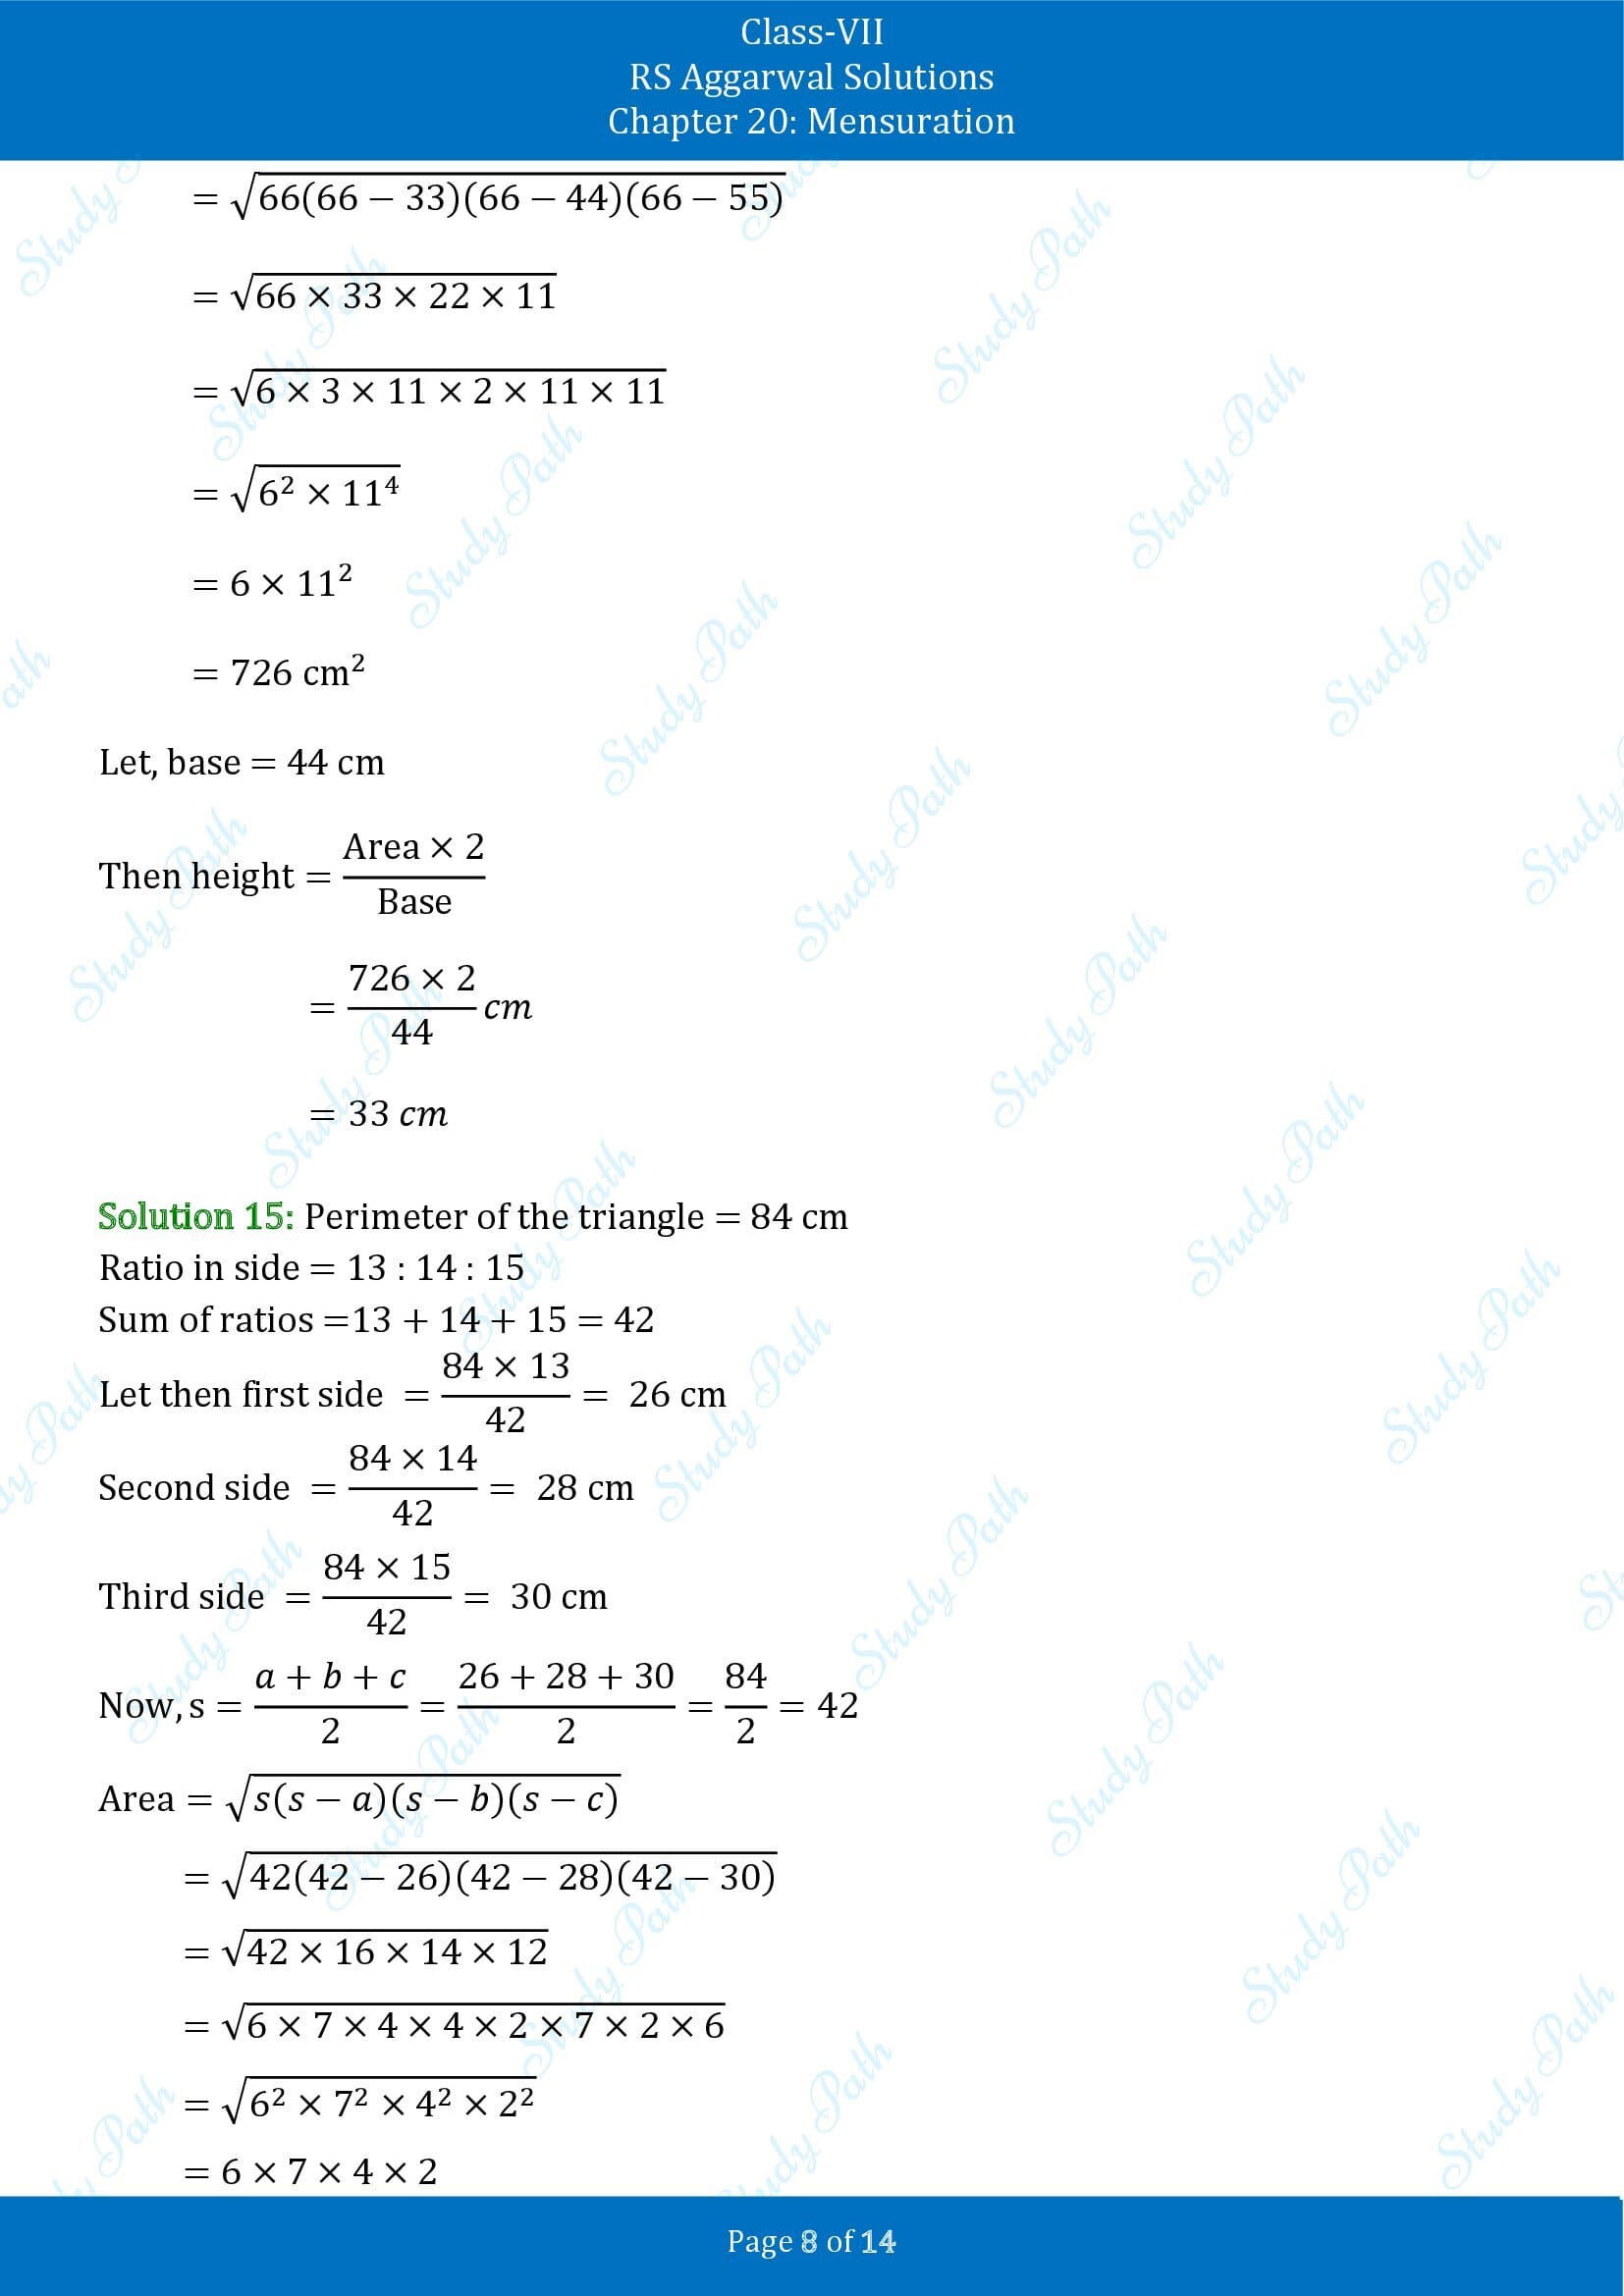 RS Aggarwal Solutions Class 7 Chapter 20 Mensuration Exercise 20D 00008